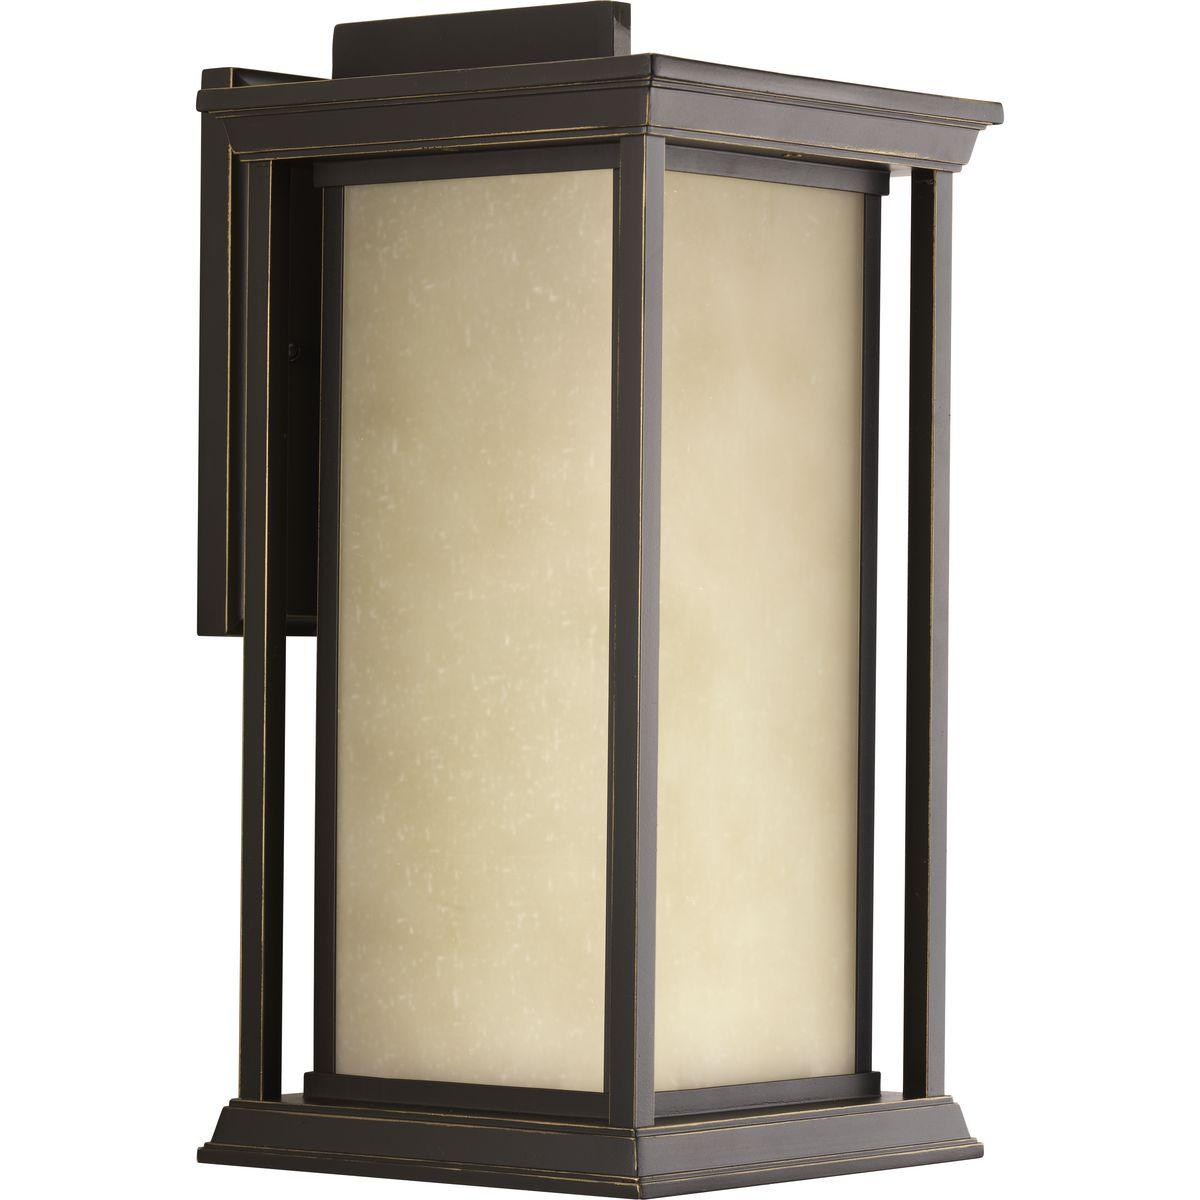 Hubbell P5613-20 One-light x-large wall lantern with a Craftsman-inspired modern silhouette, Endicott offers visual interest when both lit and unlit. The elongated frame is elegantly finished with linen glass diffuser.  ; Craftsman-inspired modern silhouette. ; Visually a